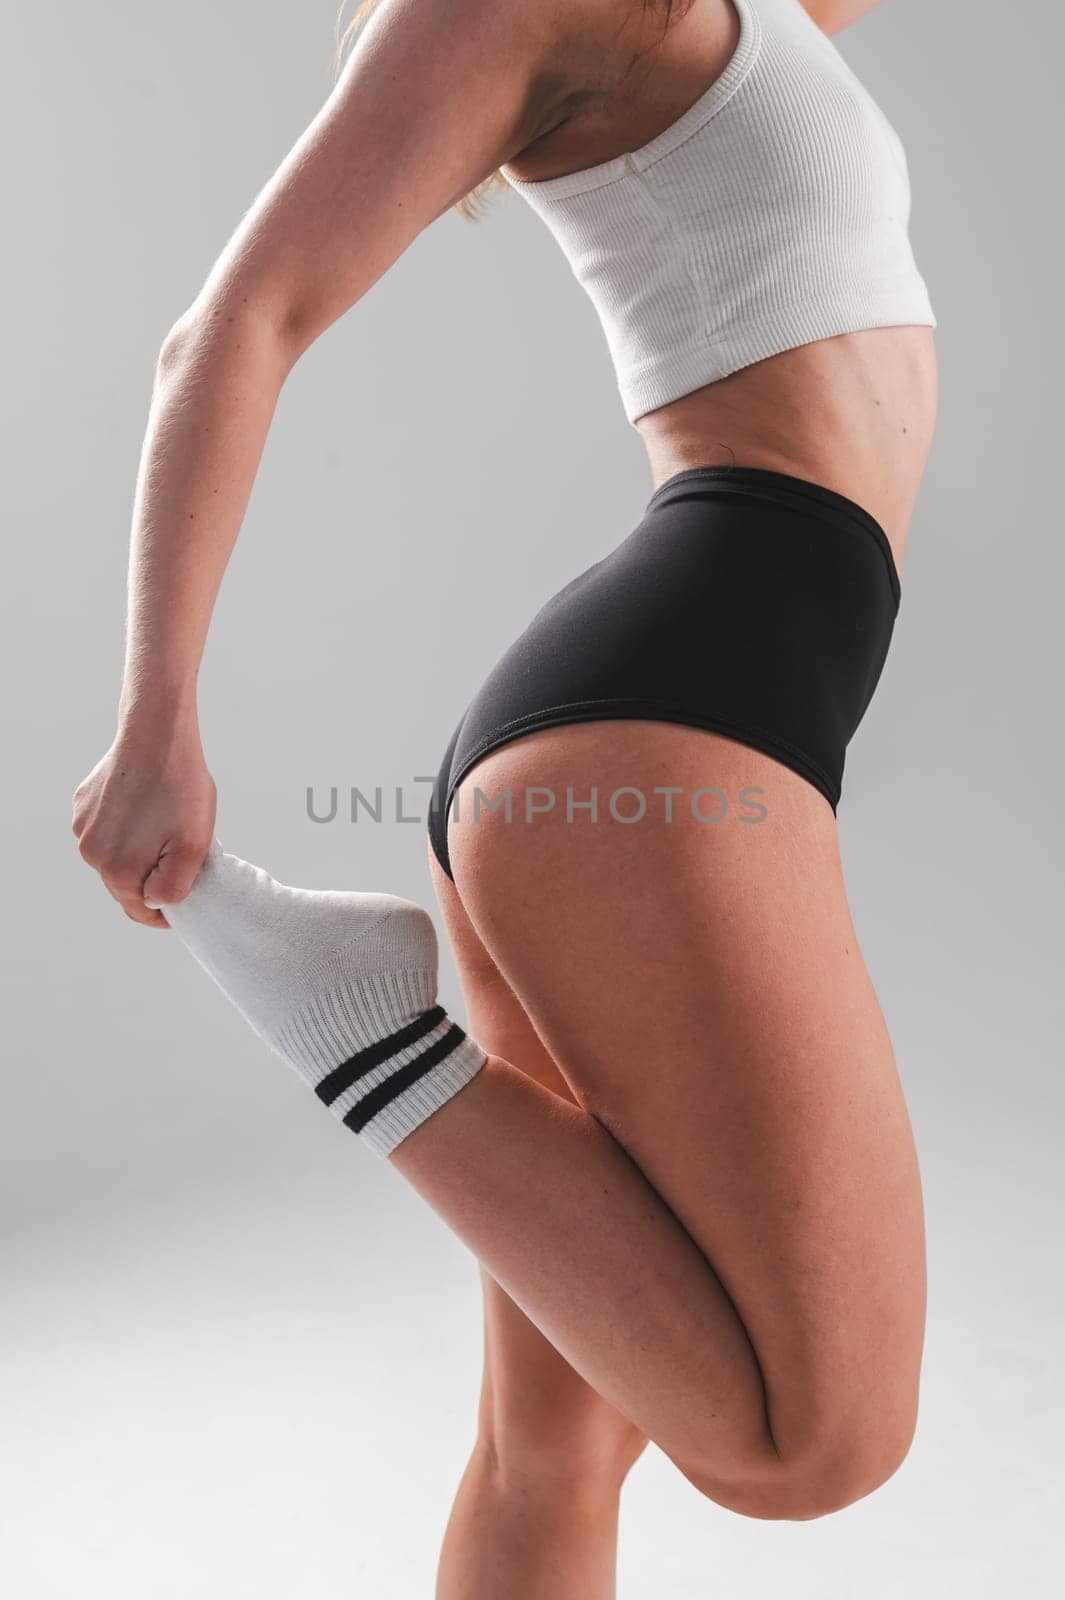 Faceless woman stretching her quadriceps on a white background. Vertical photo. by mrwed54